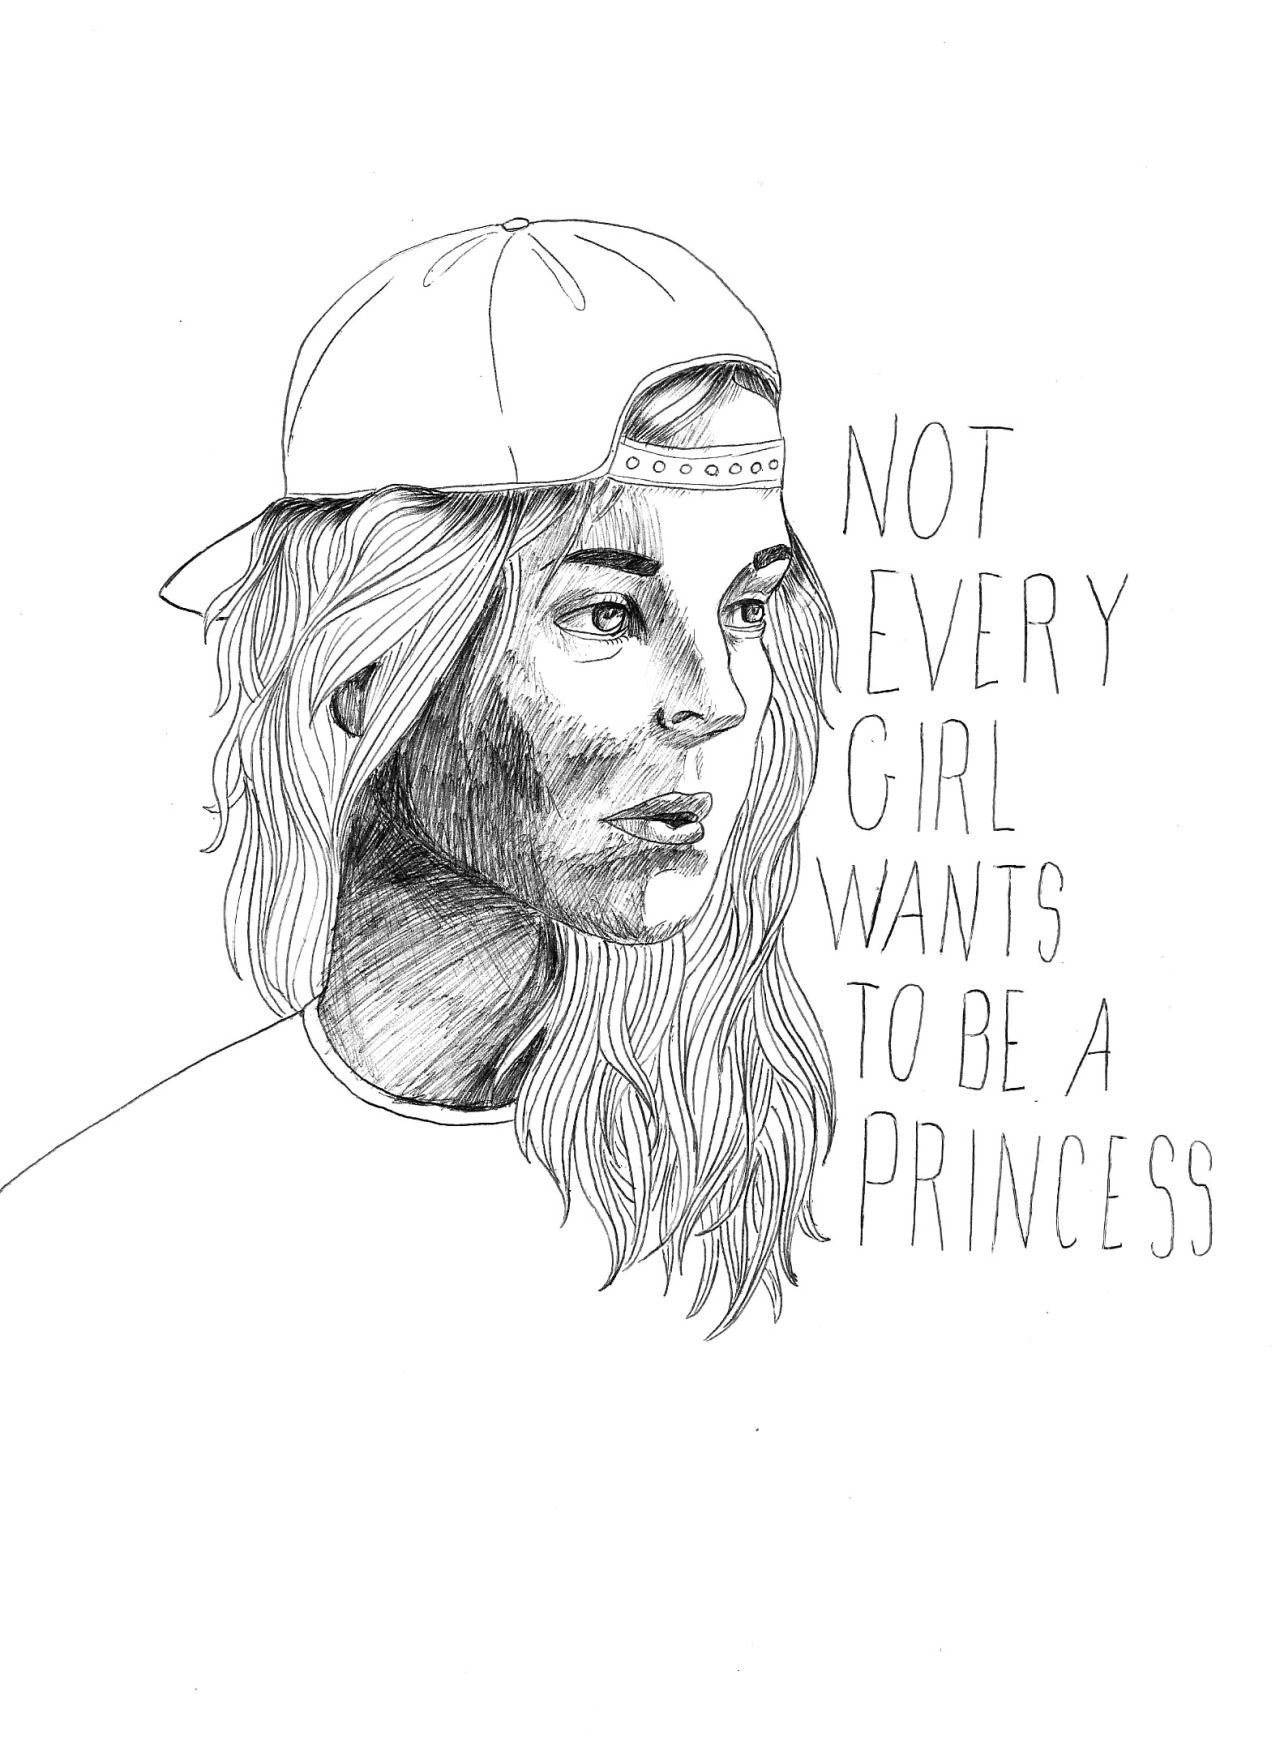 Tomboys unite. Tomboy quotes, How to draw hair, Tomboy hairstyles